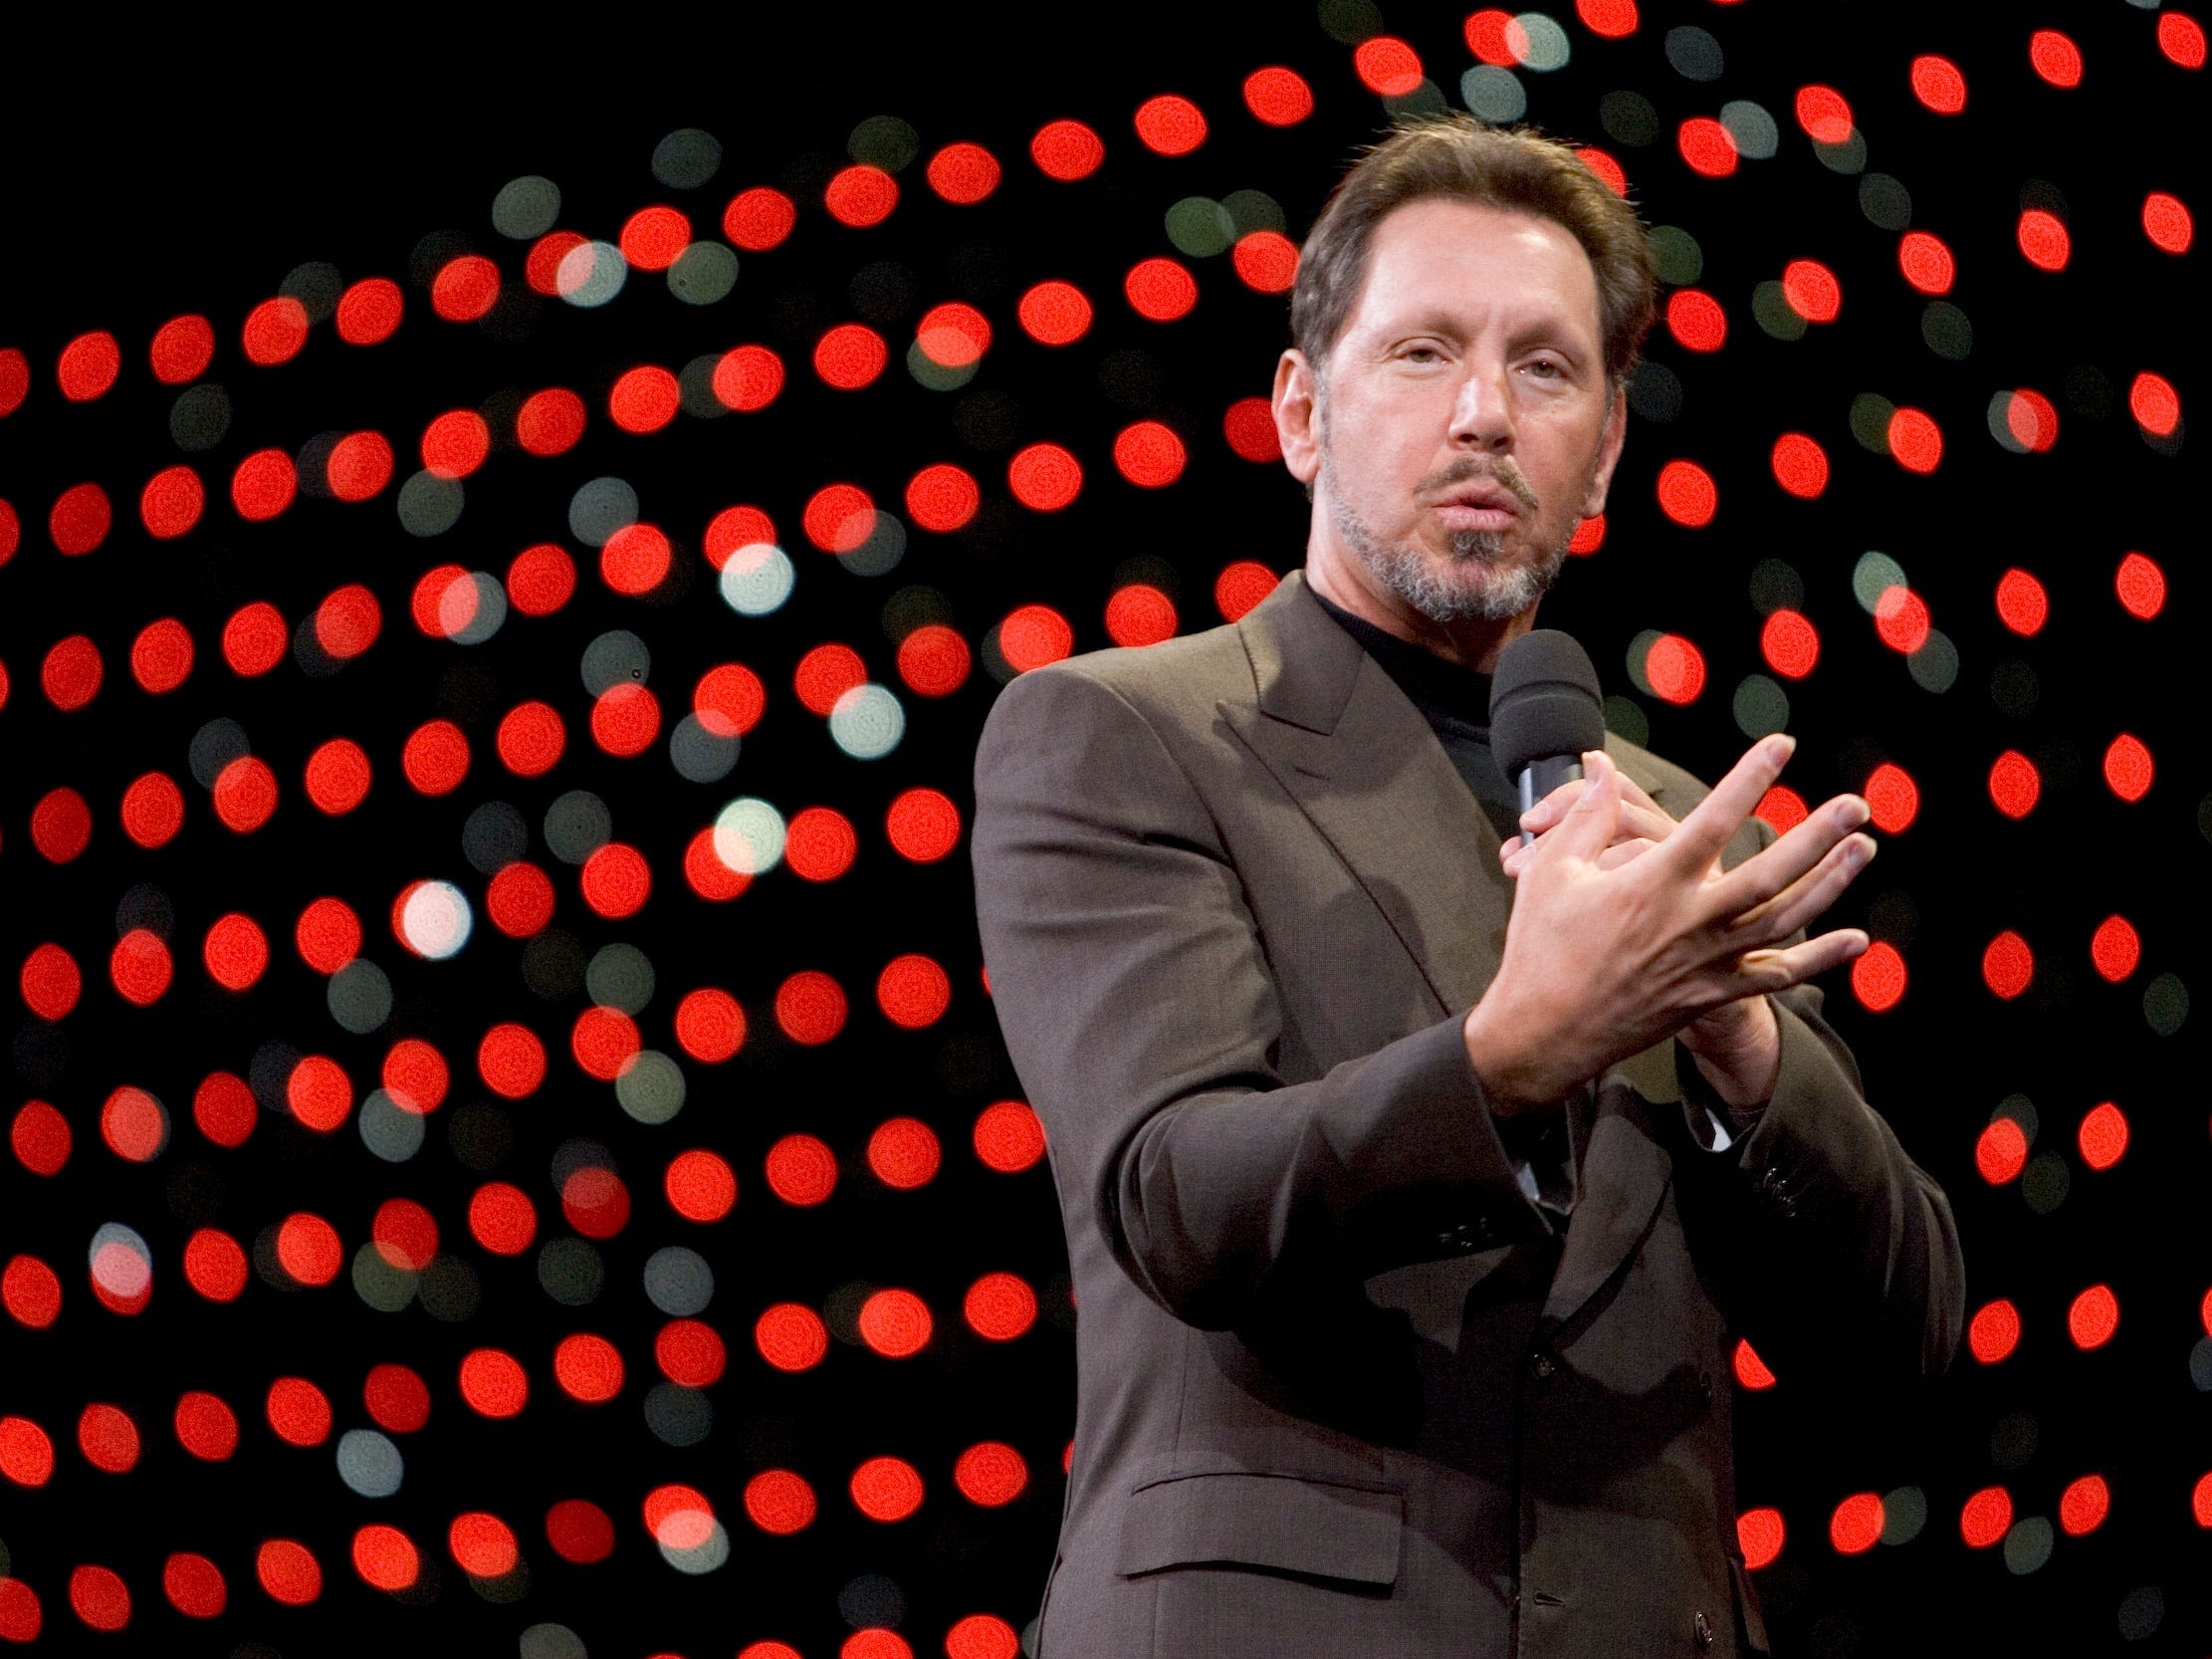 The life and career of Larry Ellison, Oracle CEO and founder, who went from college drop-out to the world's fifth richest person